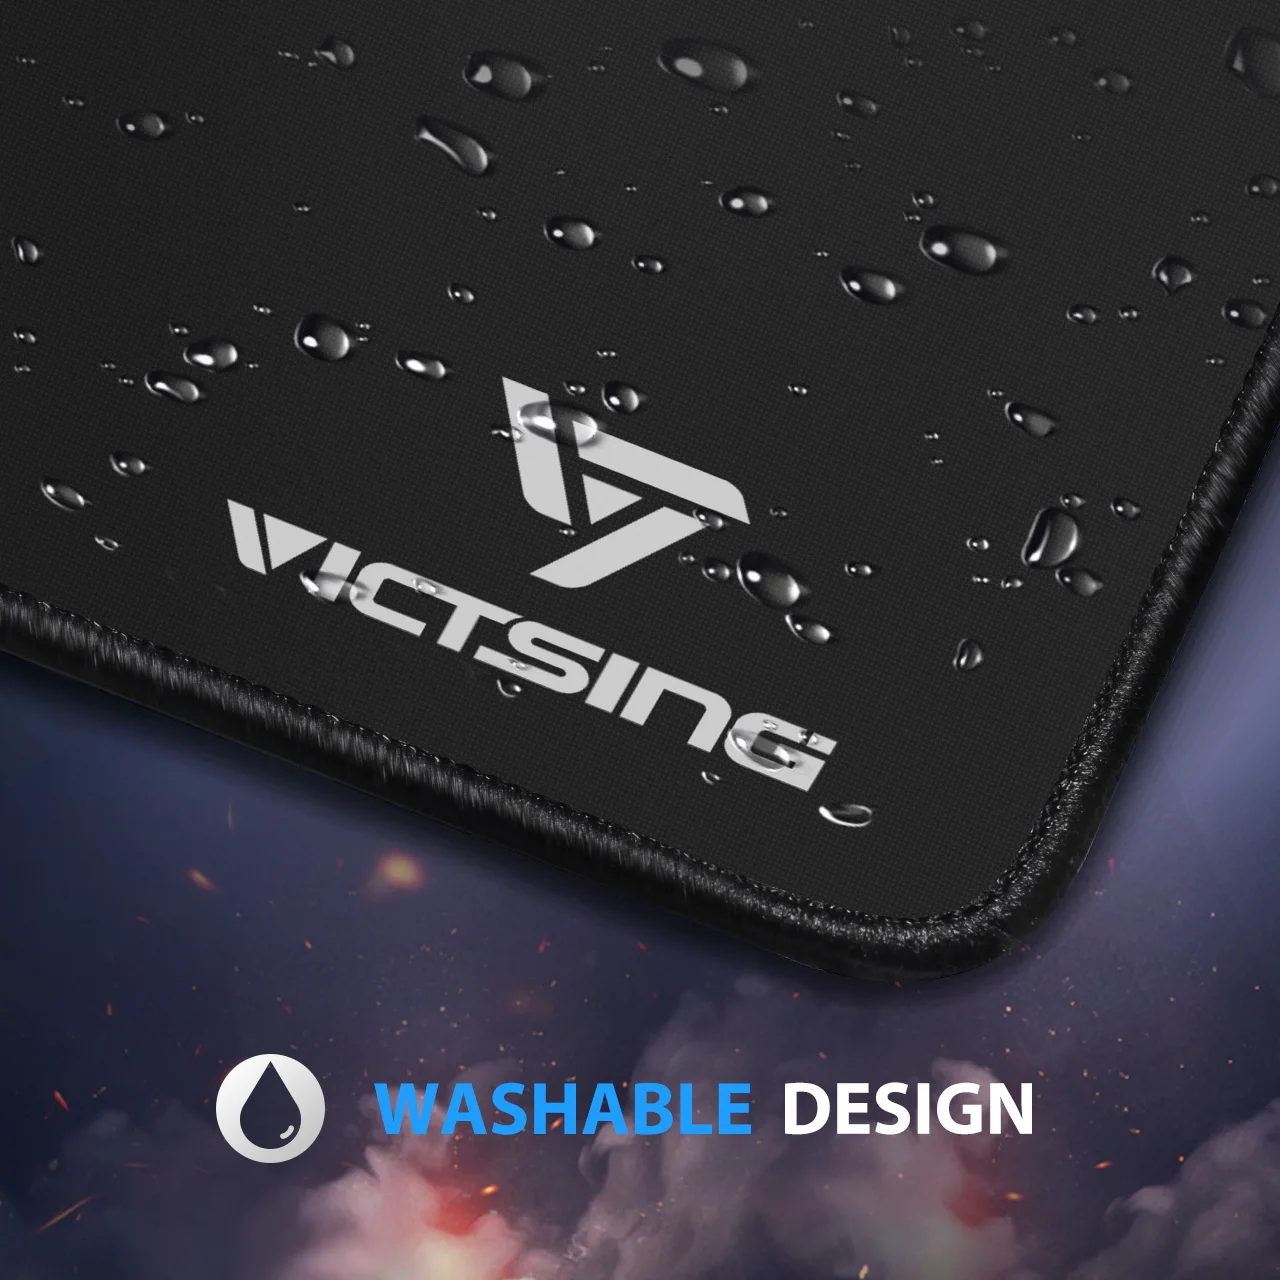 VicTsing [30% Larger] RGB Gaming Mouse Pad, 12 Lighting Modes,  31.5×15.75×0.2 In, Large Mouse Pad, Non-Slip Rubber Base, Waterproof  Computer Keyboard Mouse Mat Foam Board For Gamer/Esports Pros/Office